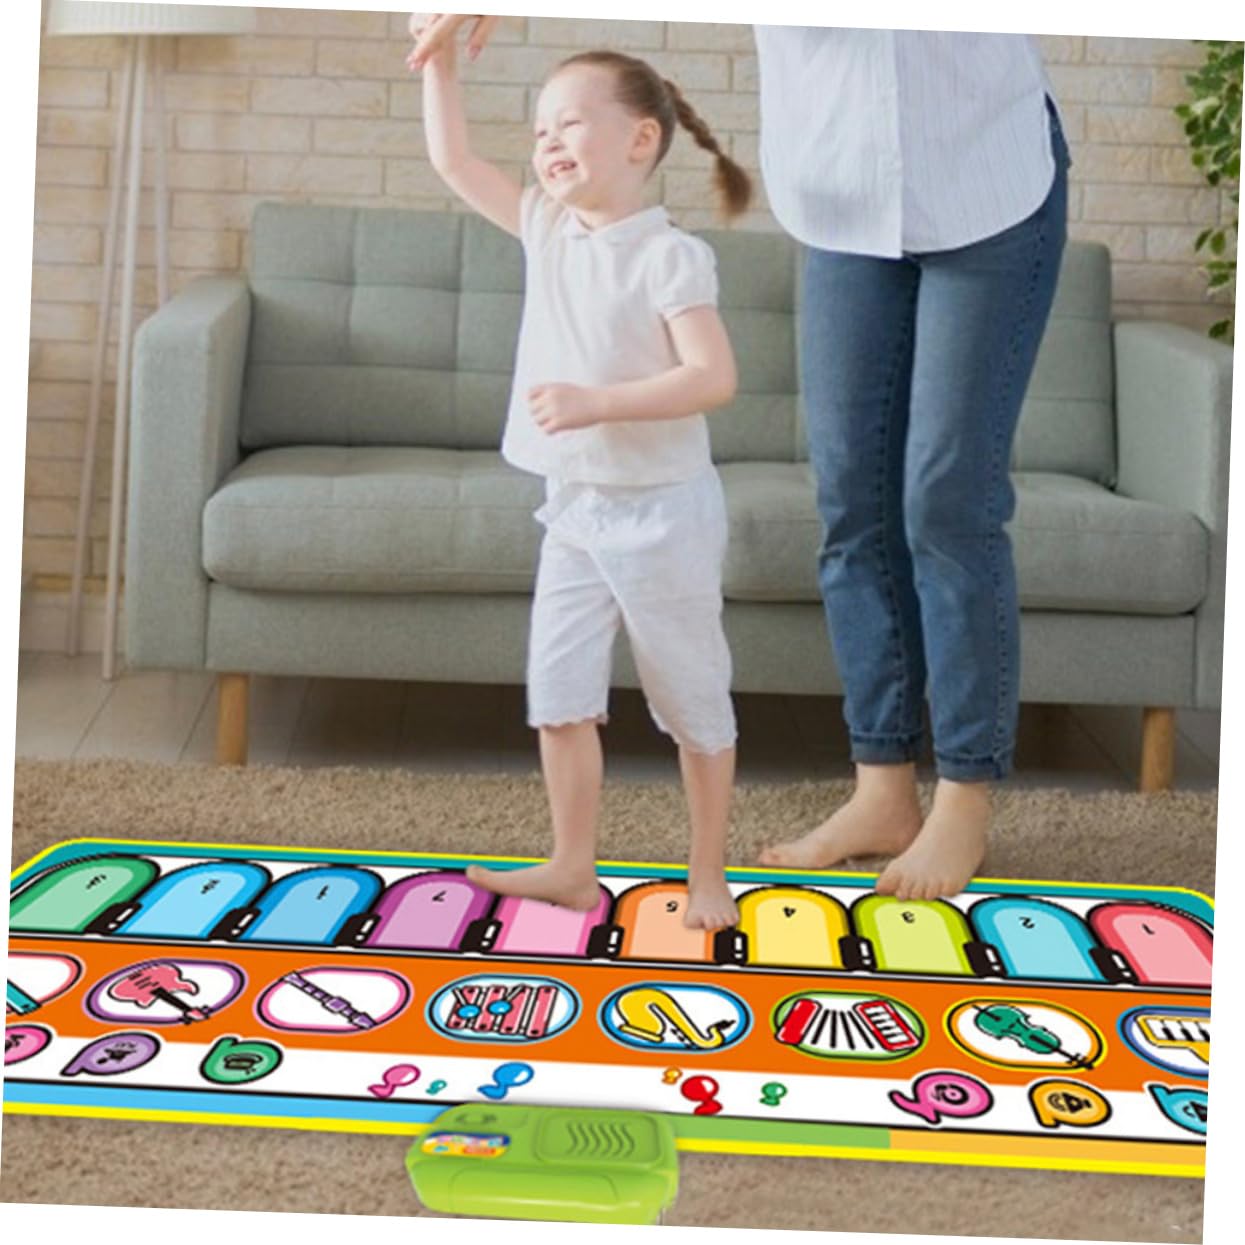 ERINGOGO 3pcs Music Blanket Toys for Kids Baby Play Mat Piano Mats Music Rug Kids Rugs Baby Boy Toys Play Mat for Baby Kidcraft Playset Gym Pads Flooring Carpet Piano Rug Electric Child